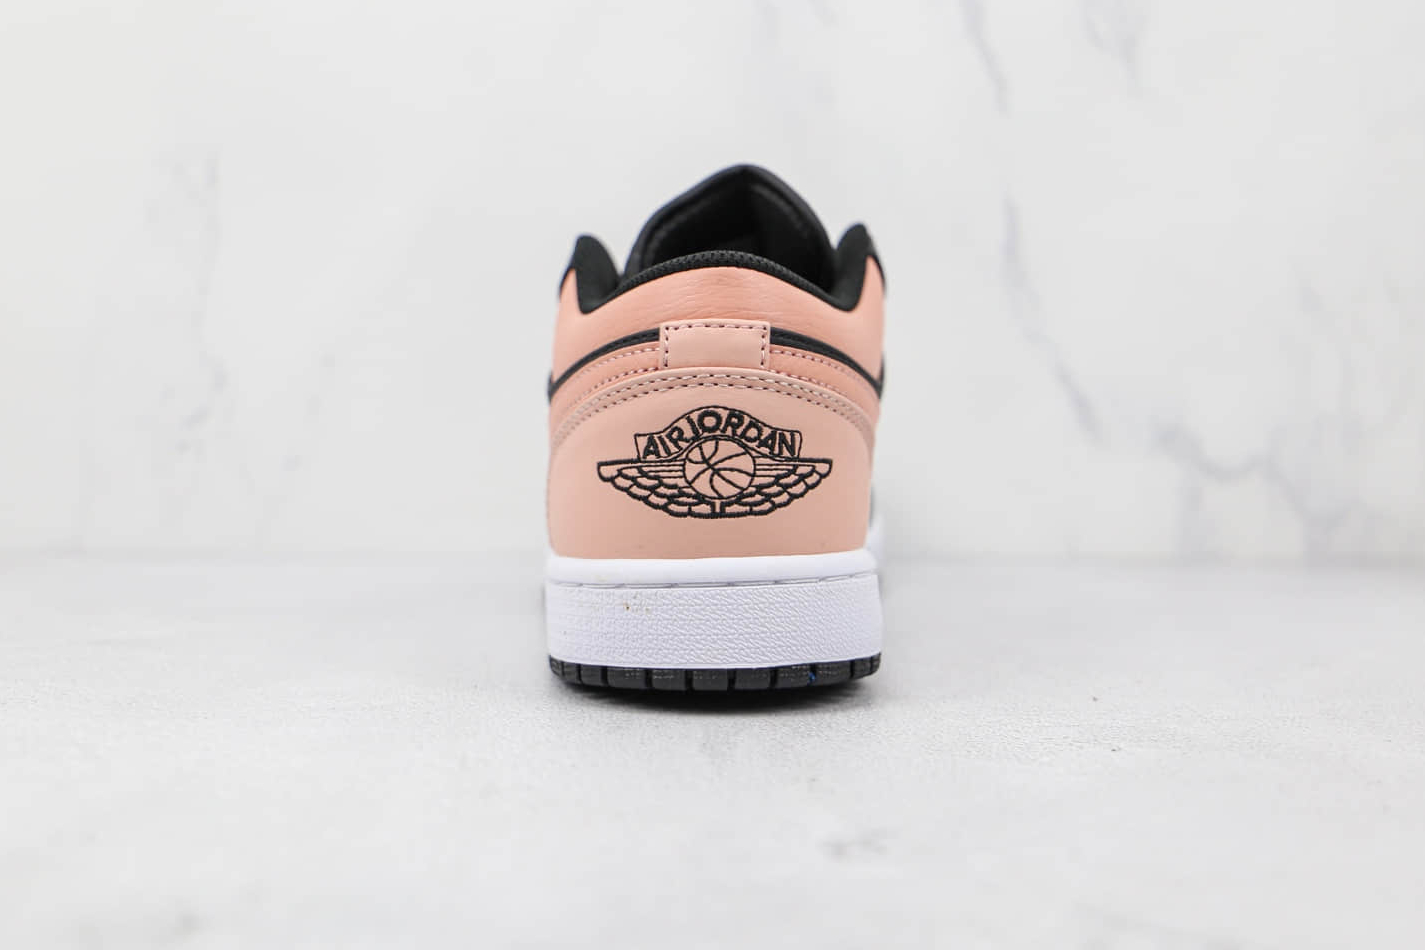 Air Jordan 1 Low 'Crimson Tint' 553558-034 - Stylish and Authentic Sneakers